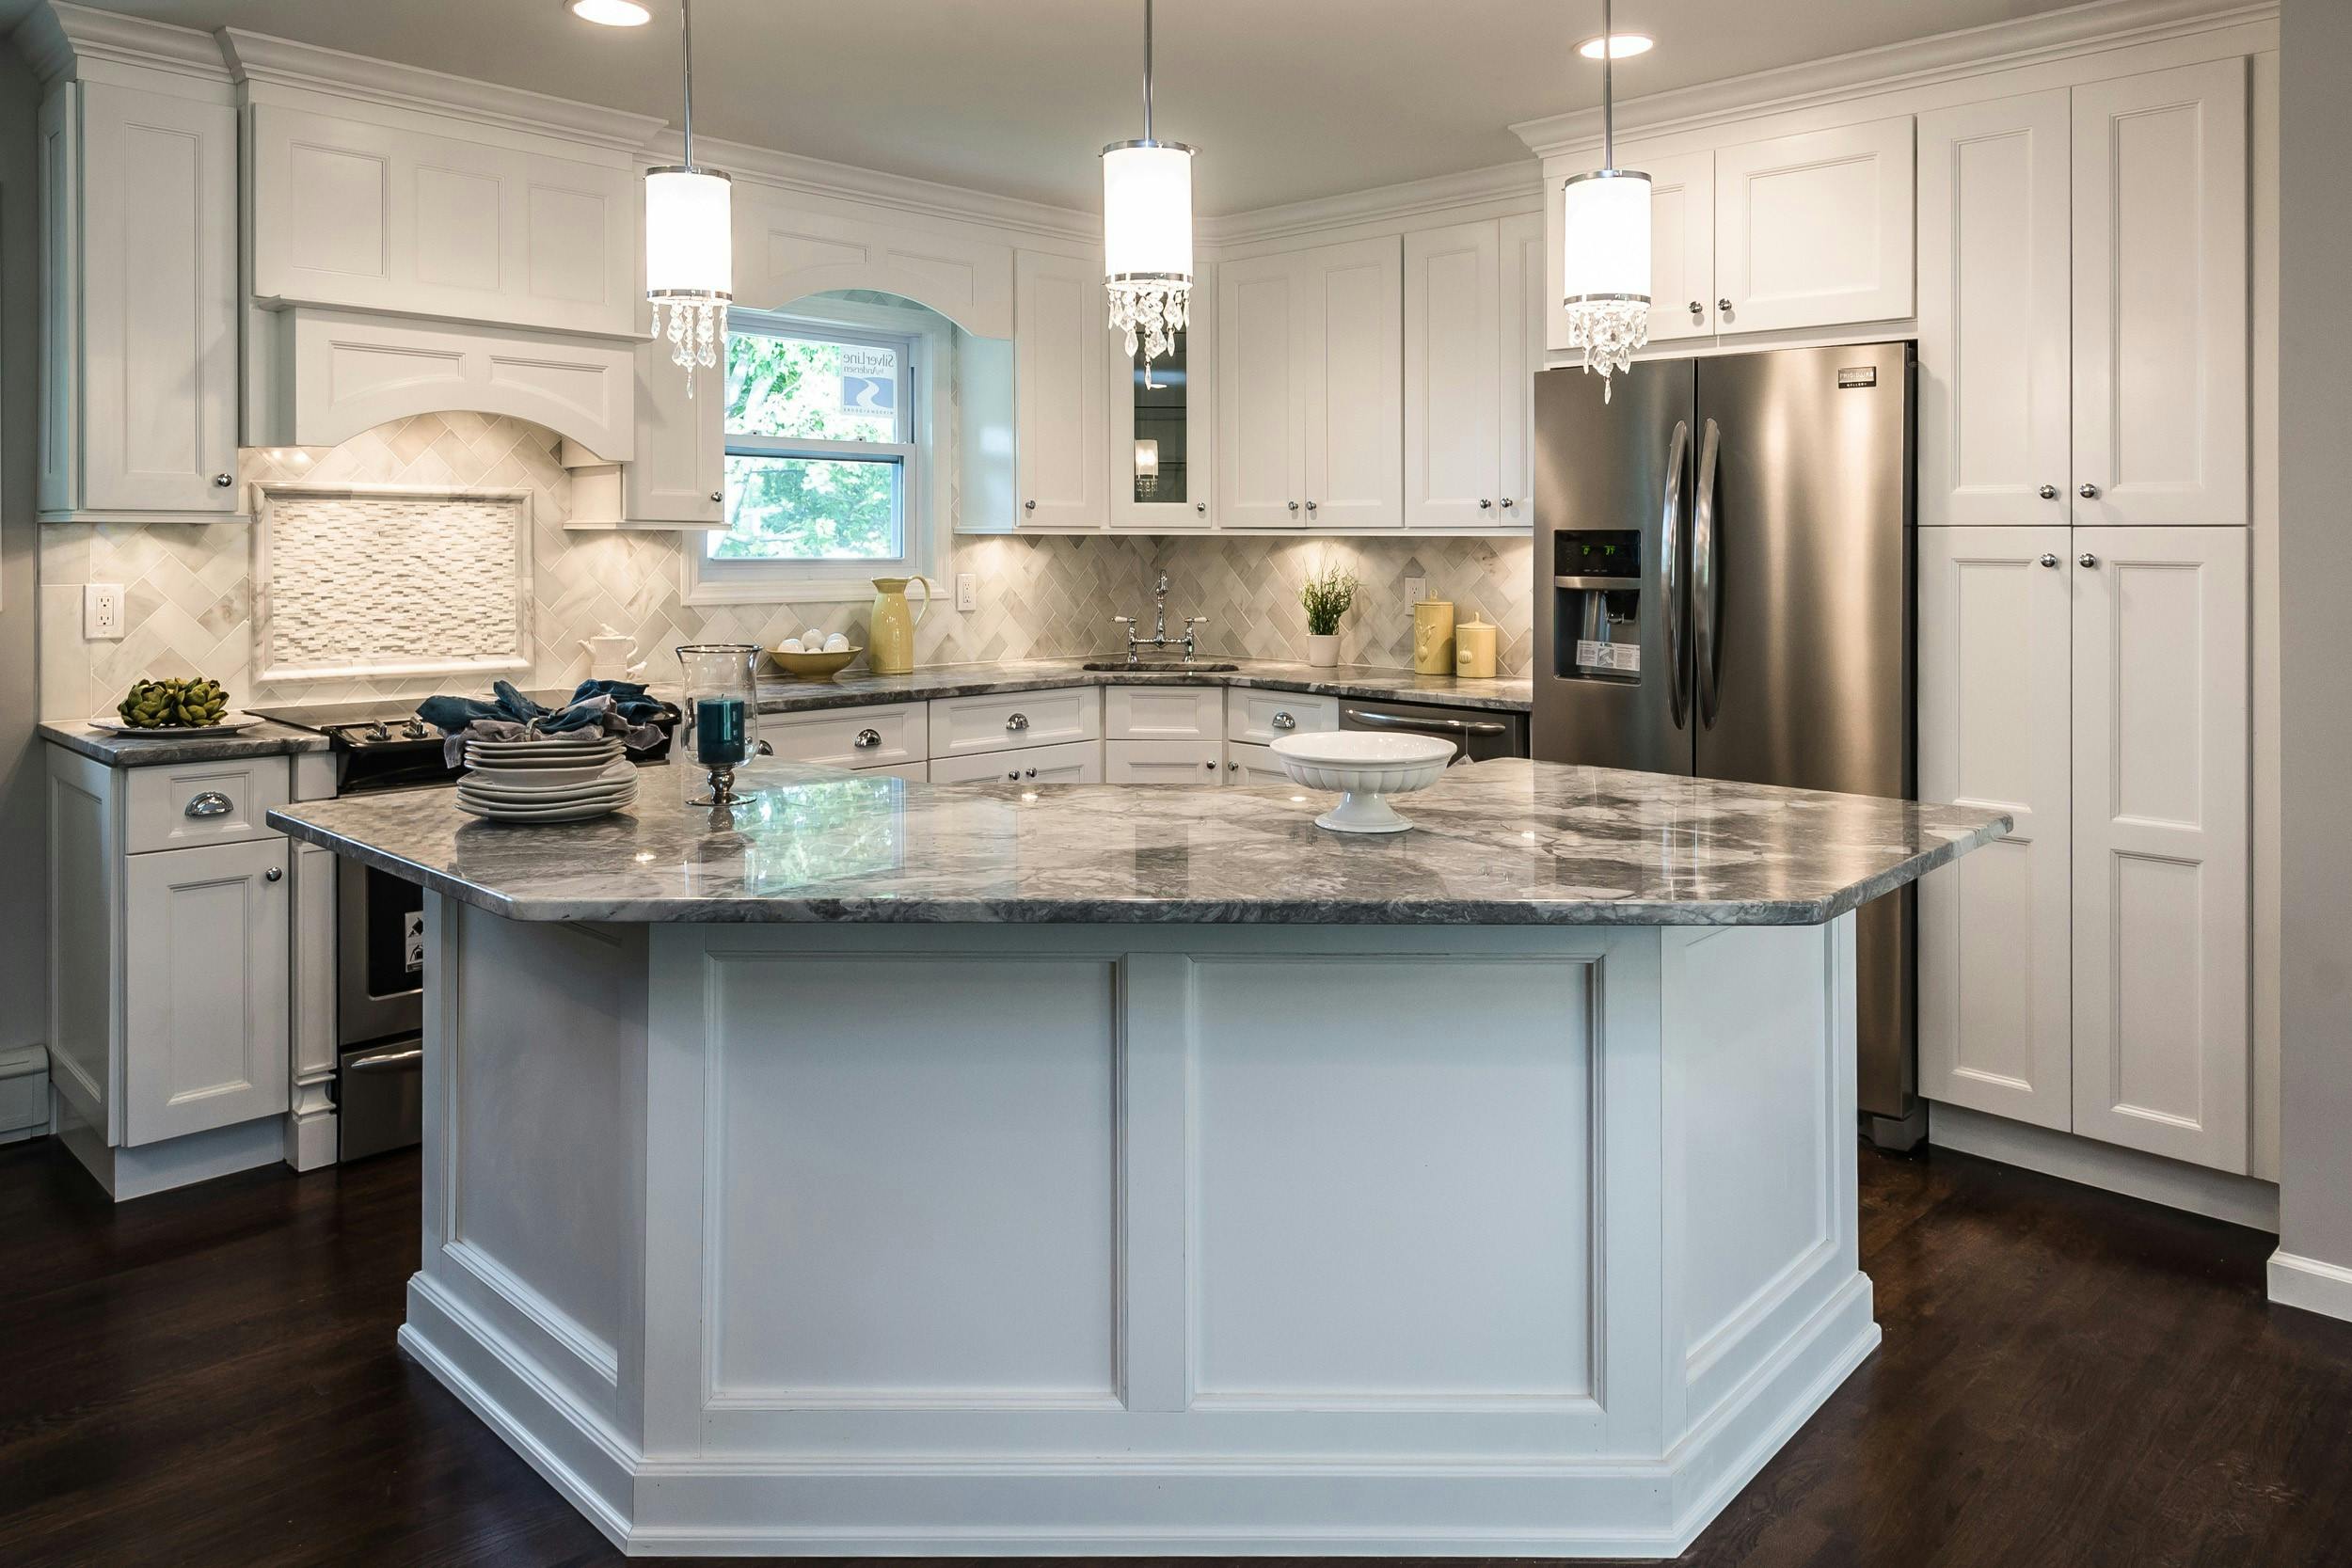 Pair Kitchen Countertops And Cabinets, What Color Cabinets Go With Dark Granite Countertops